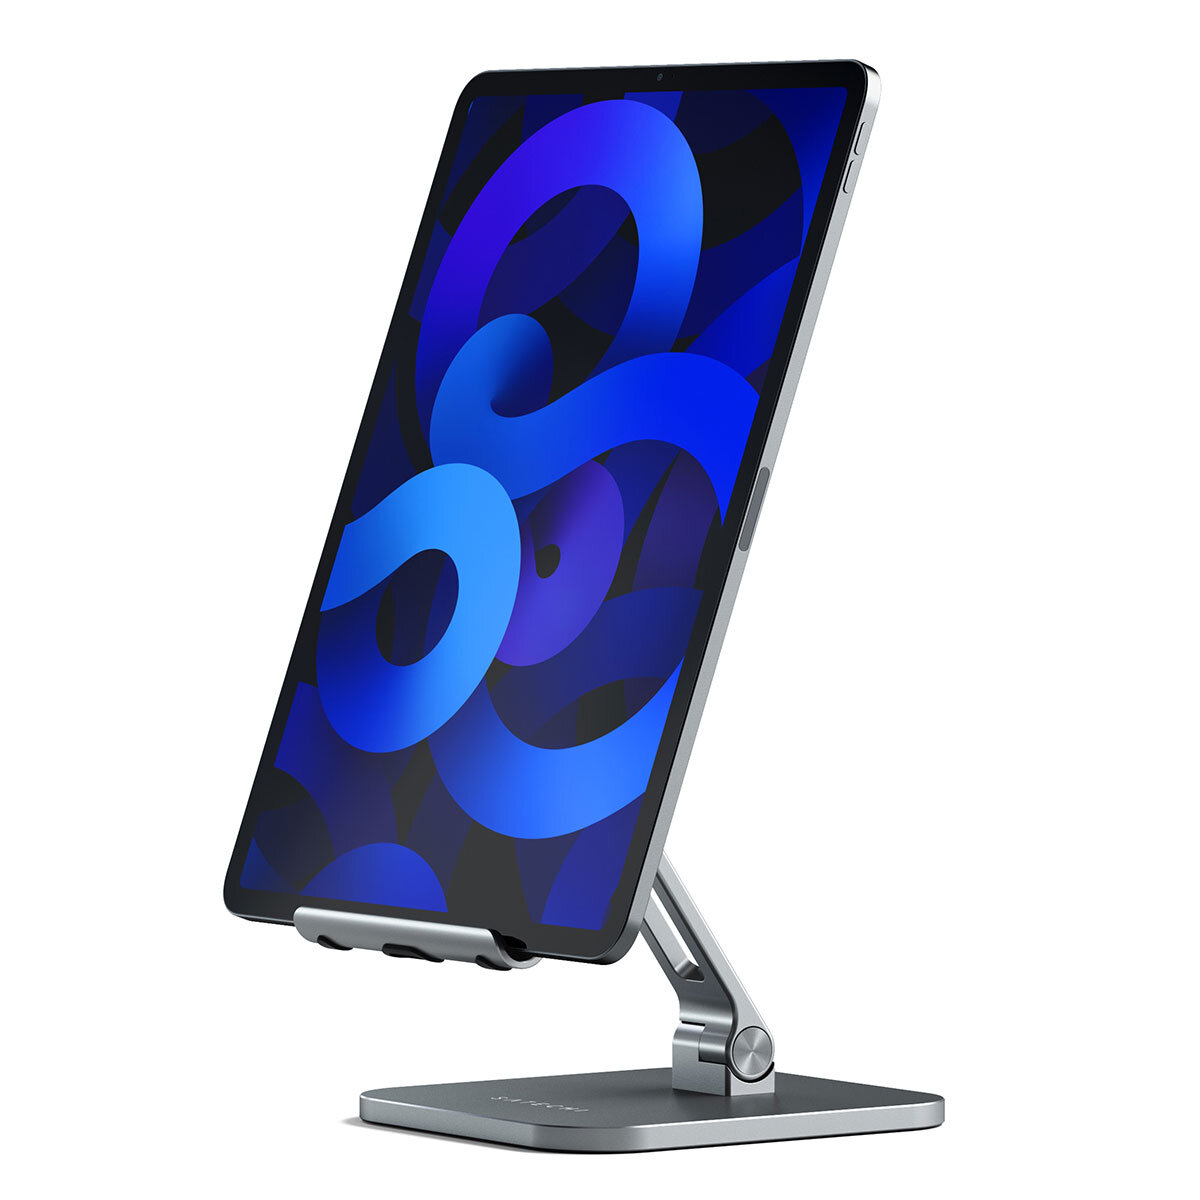 Satechi desktop stand for iPad Pro